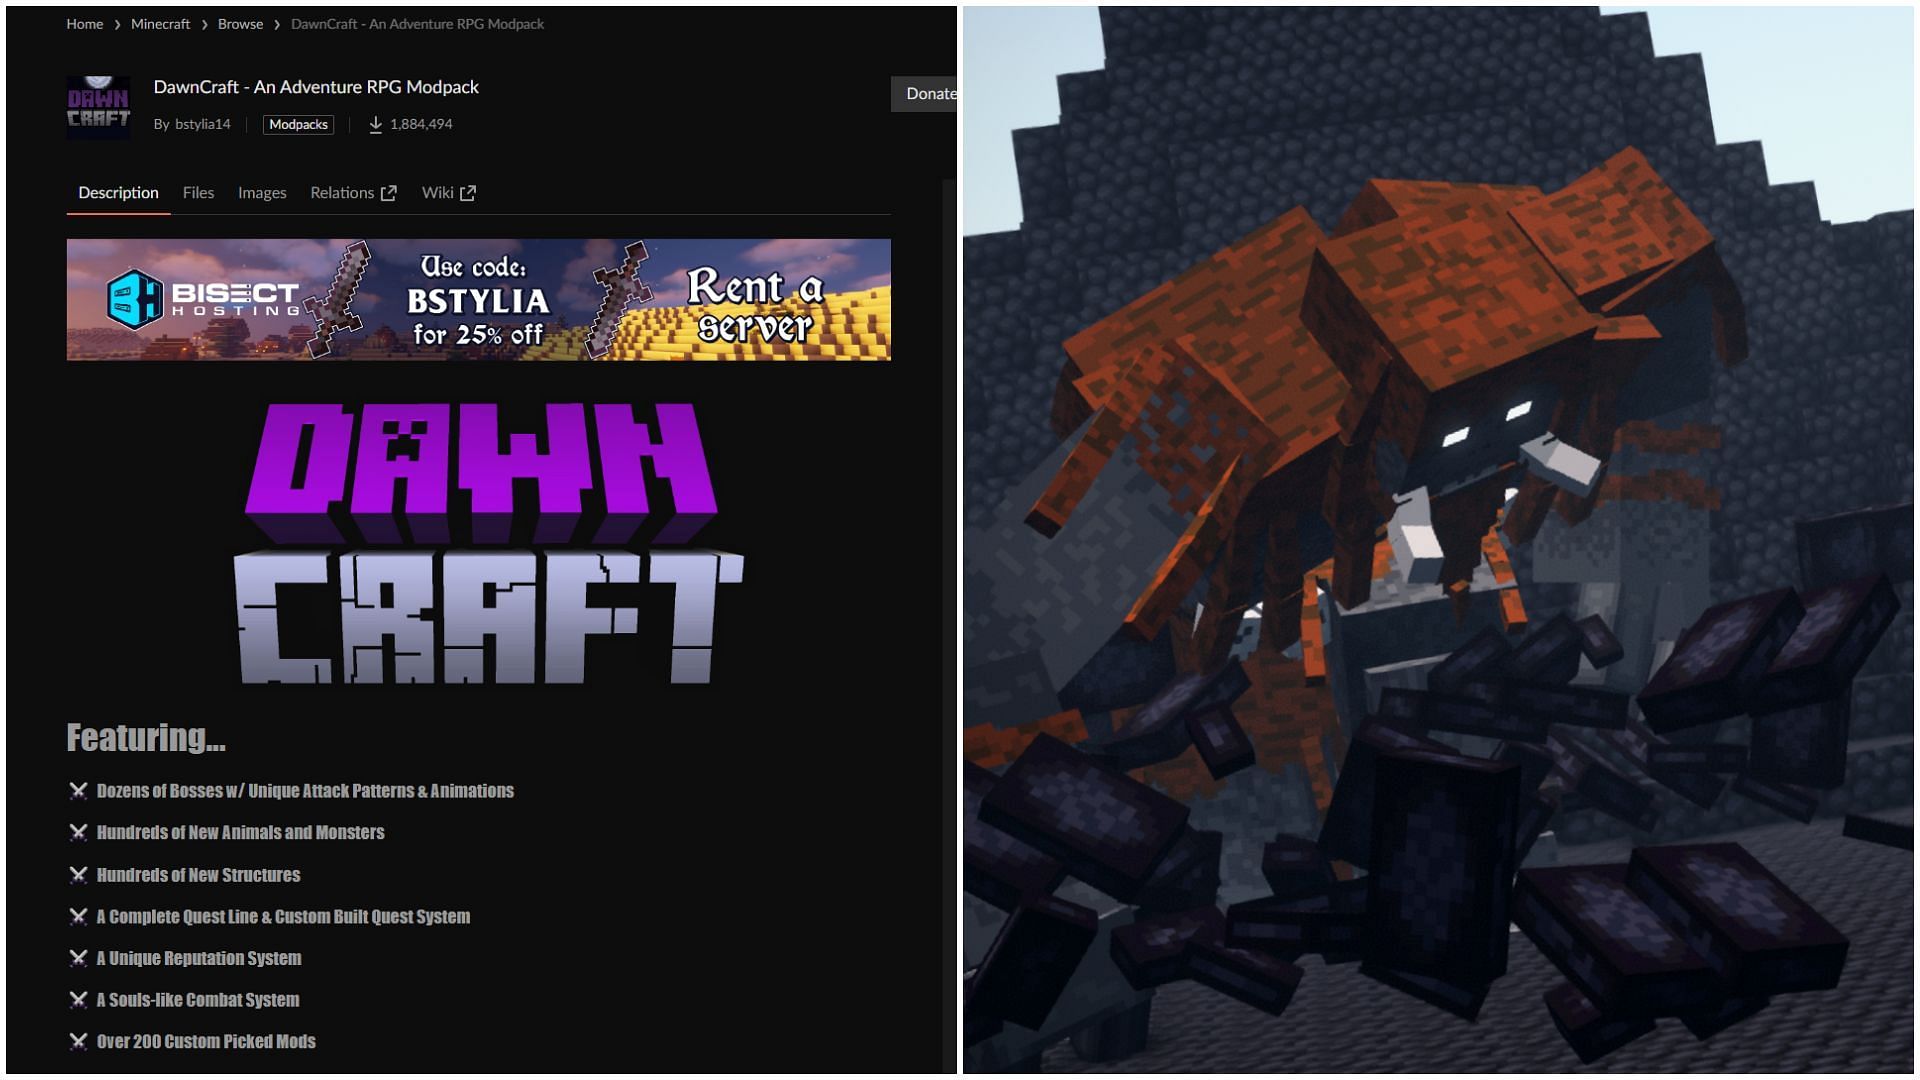 DawnCraft is a new and trending RPG modpack for Minecraft (Image via Sportskeeda)